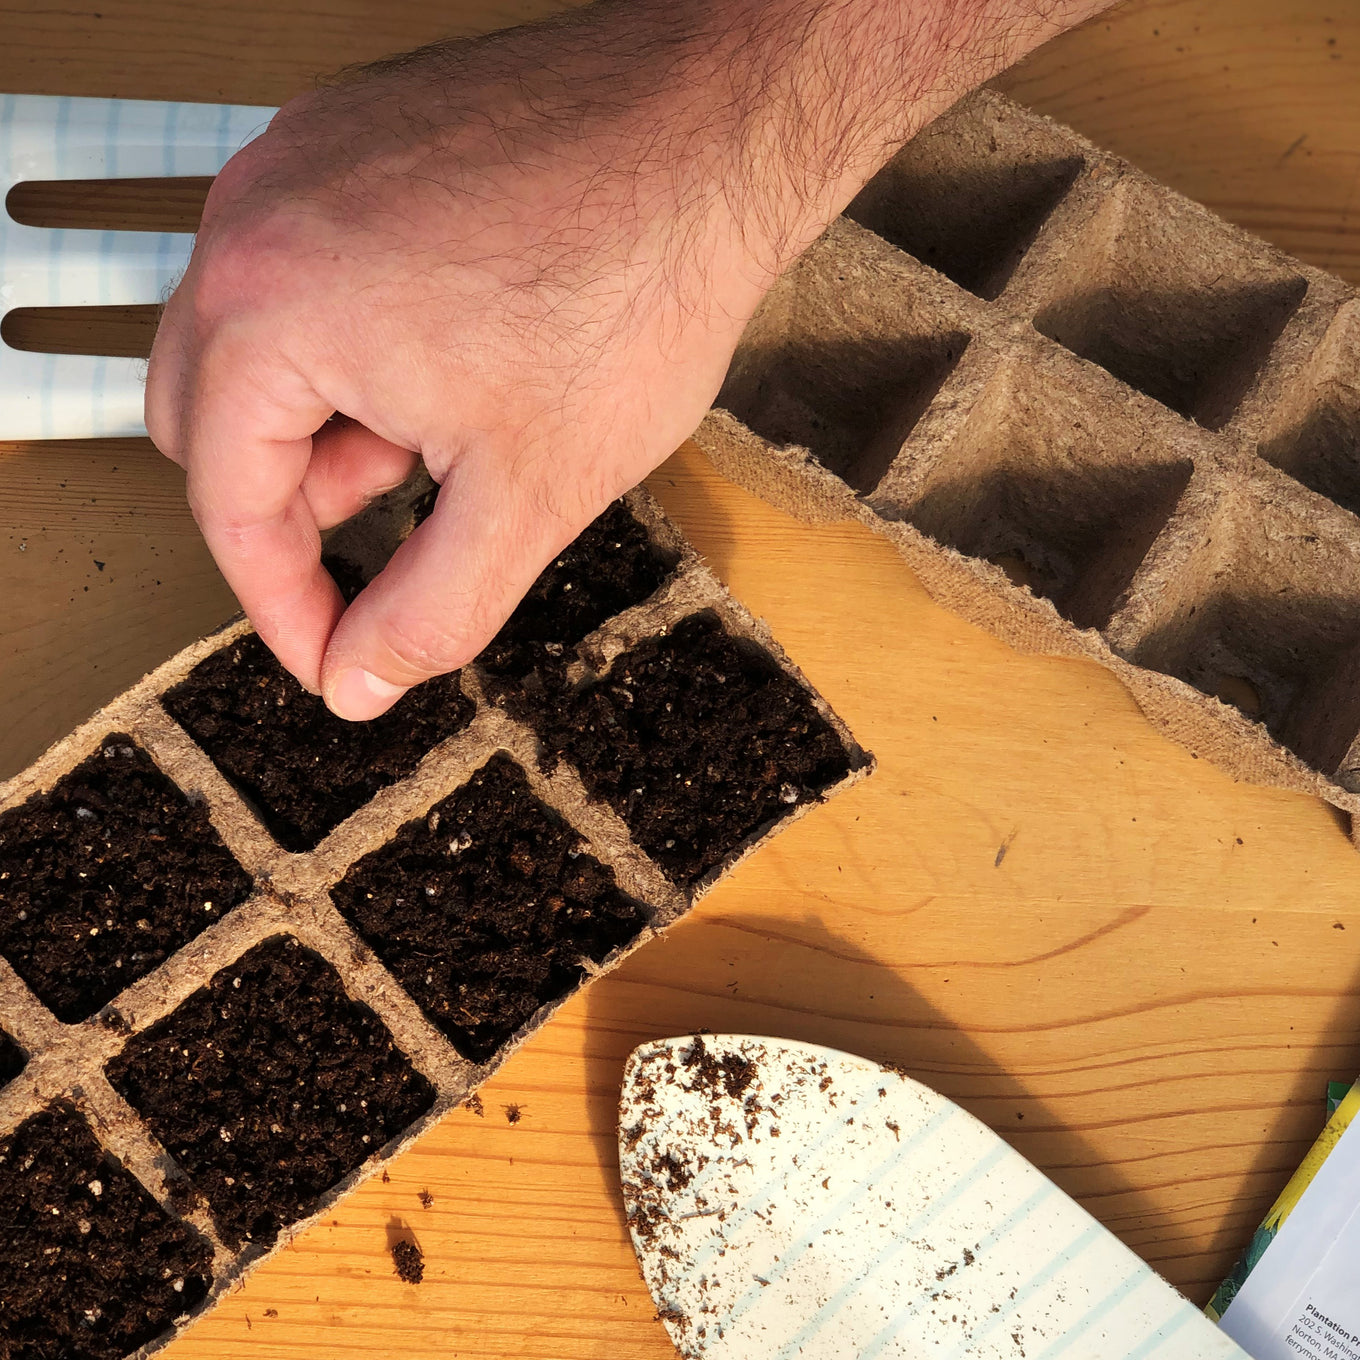 Start your Big Rainbow Heirloom Tomato seeds in biodegradable peat or paper strips for easy transplanting.